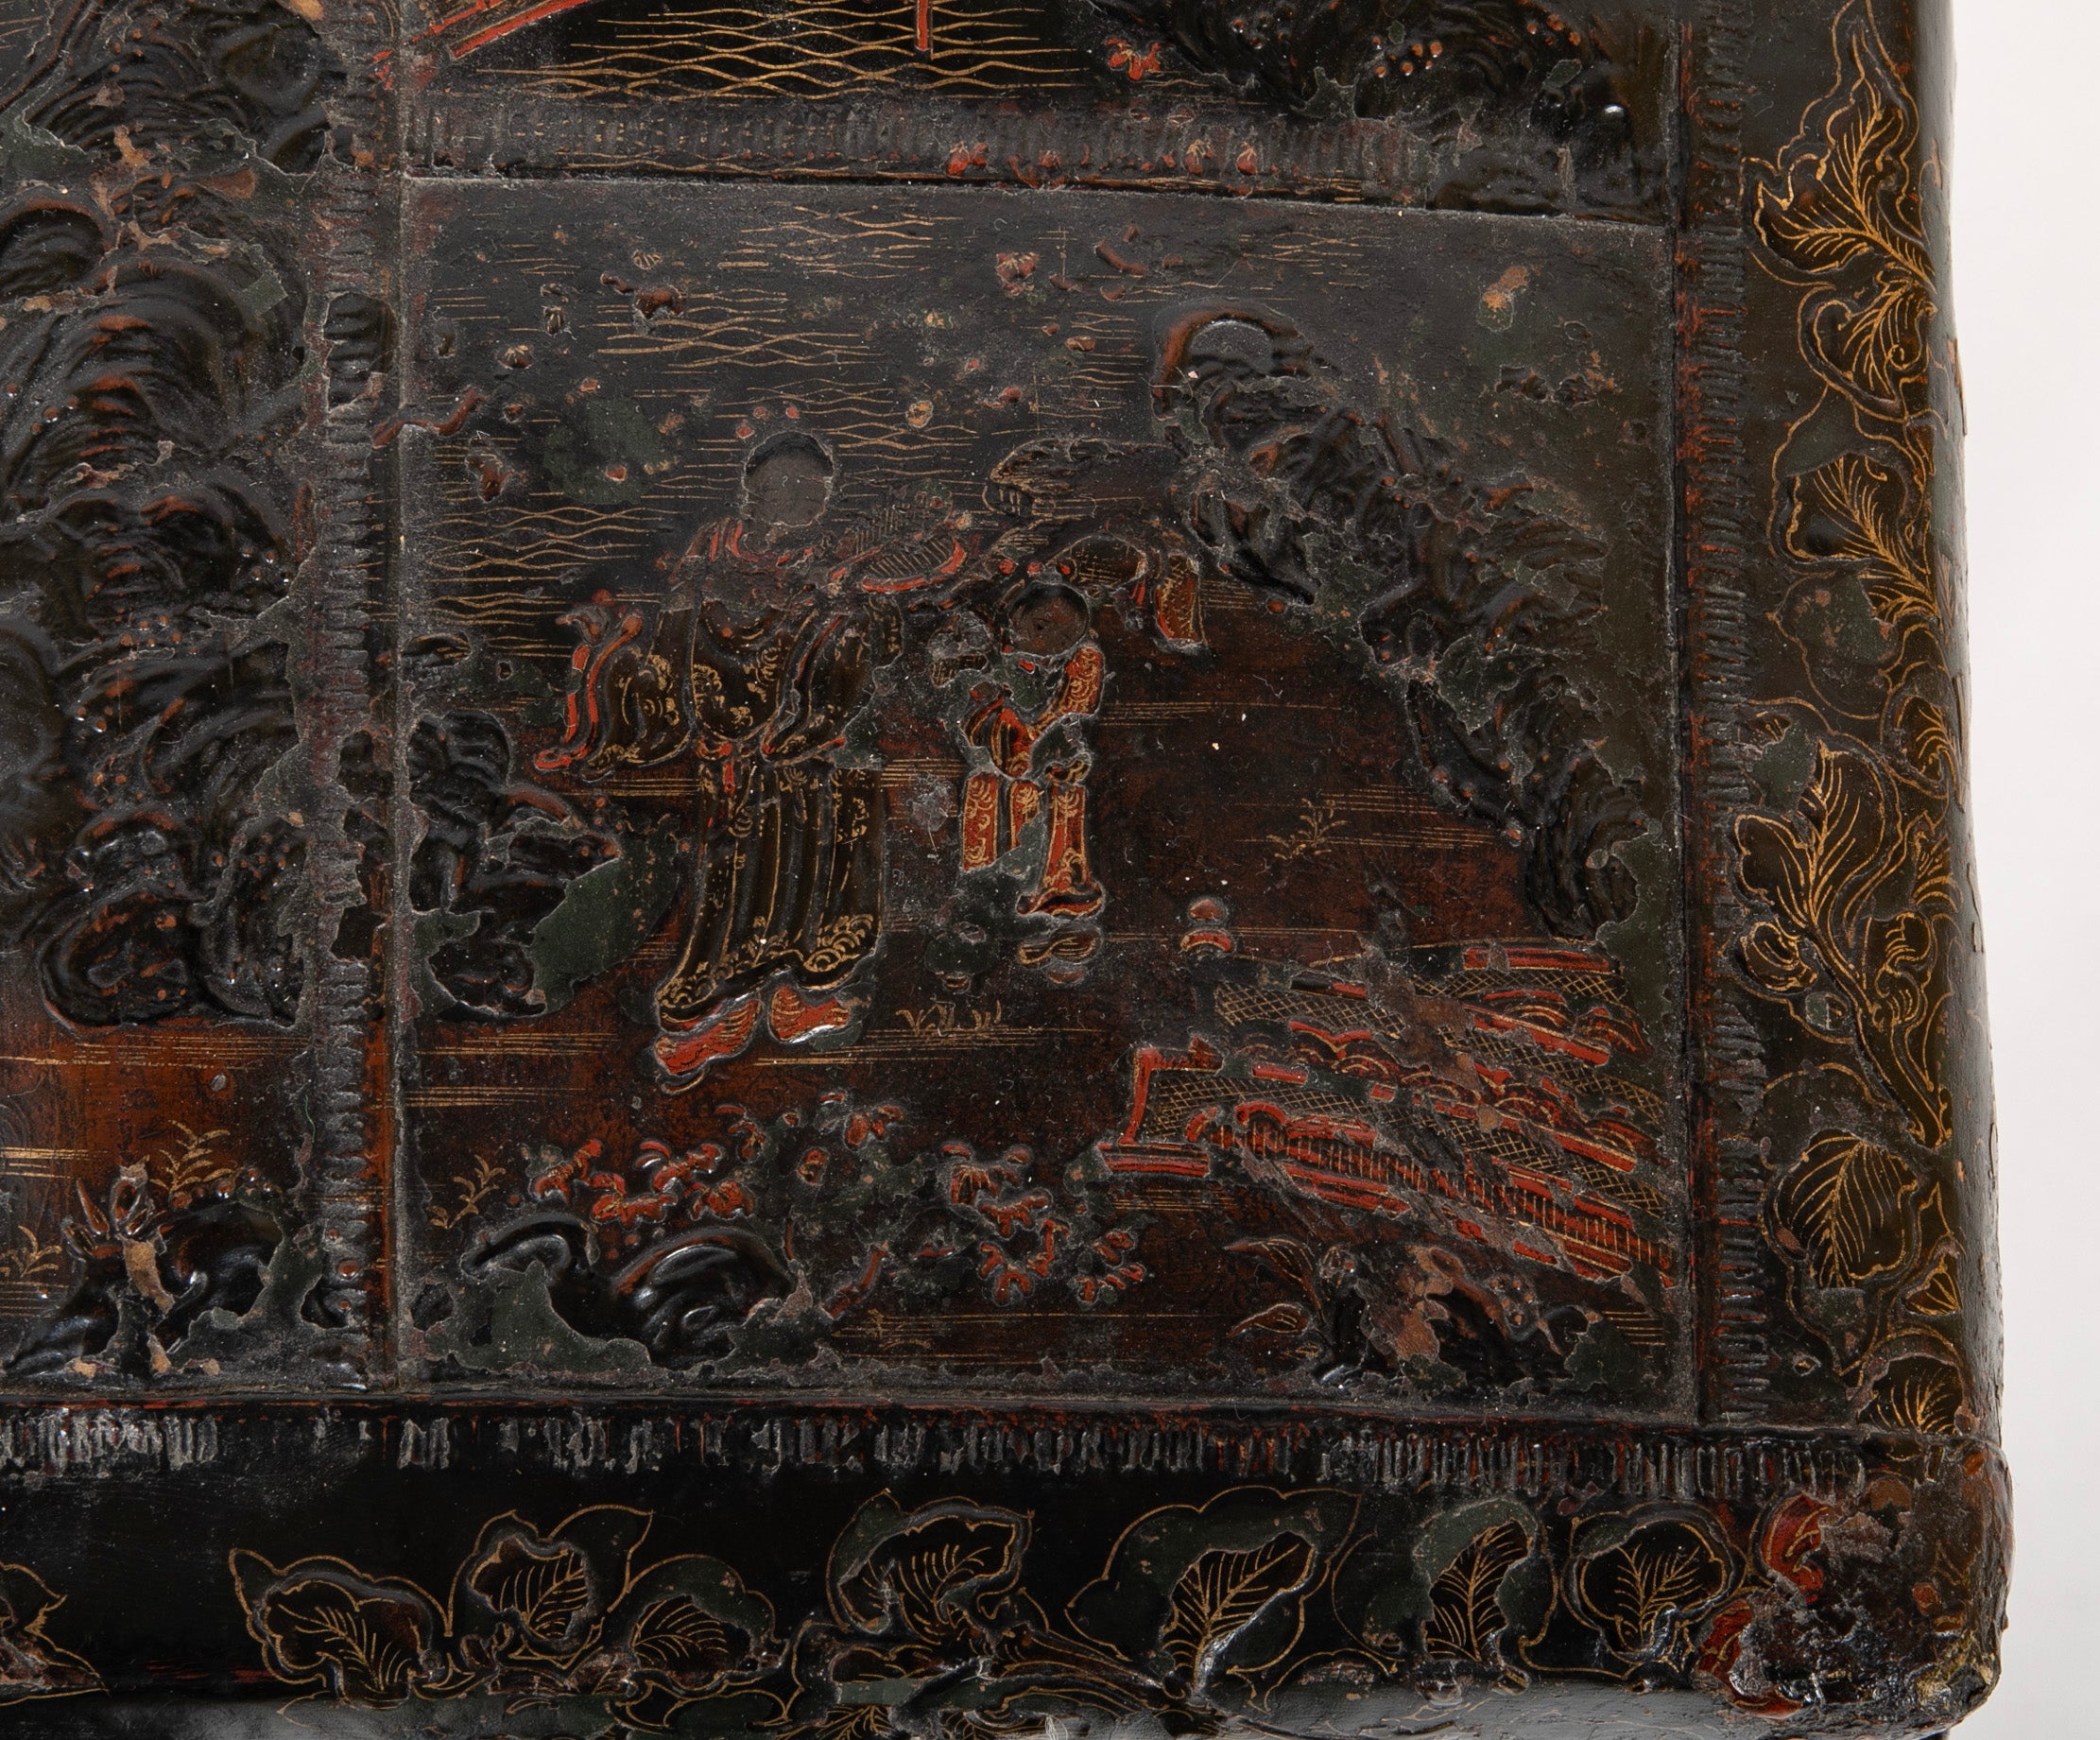 19th Century Chinese Travel Chest of Gilt Lacquer